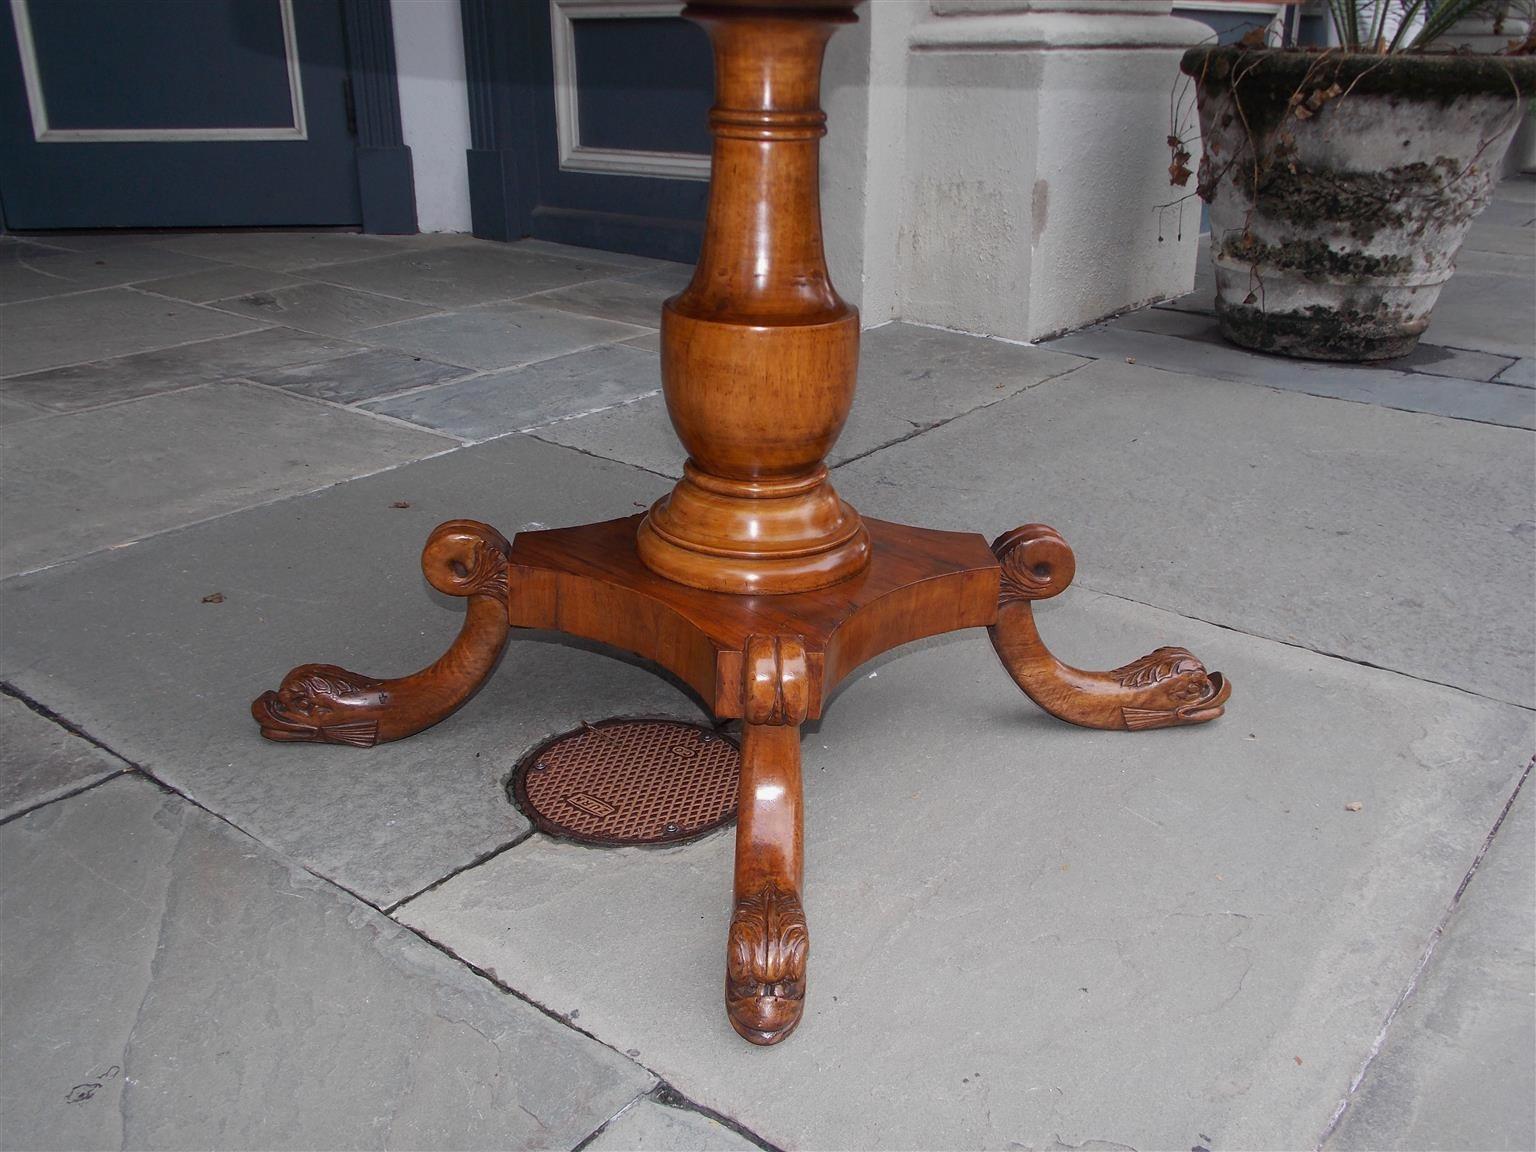 Gesso Italian Walnut Hand Painted Faux Marble Center Table with Dolphin Feet, C. 1815 For Sale